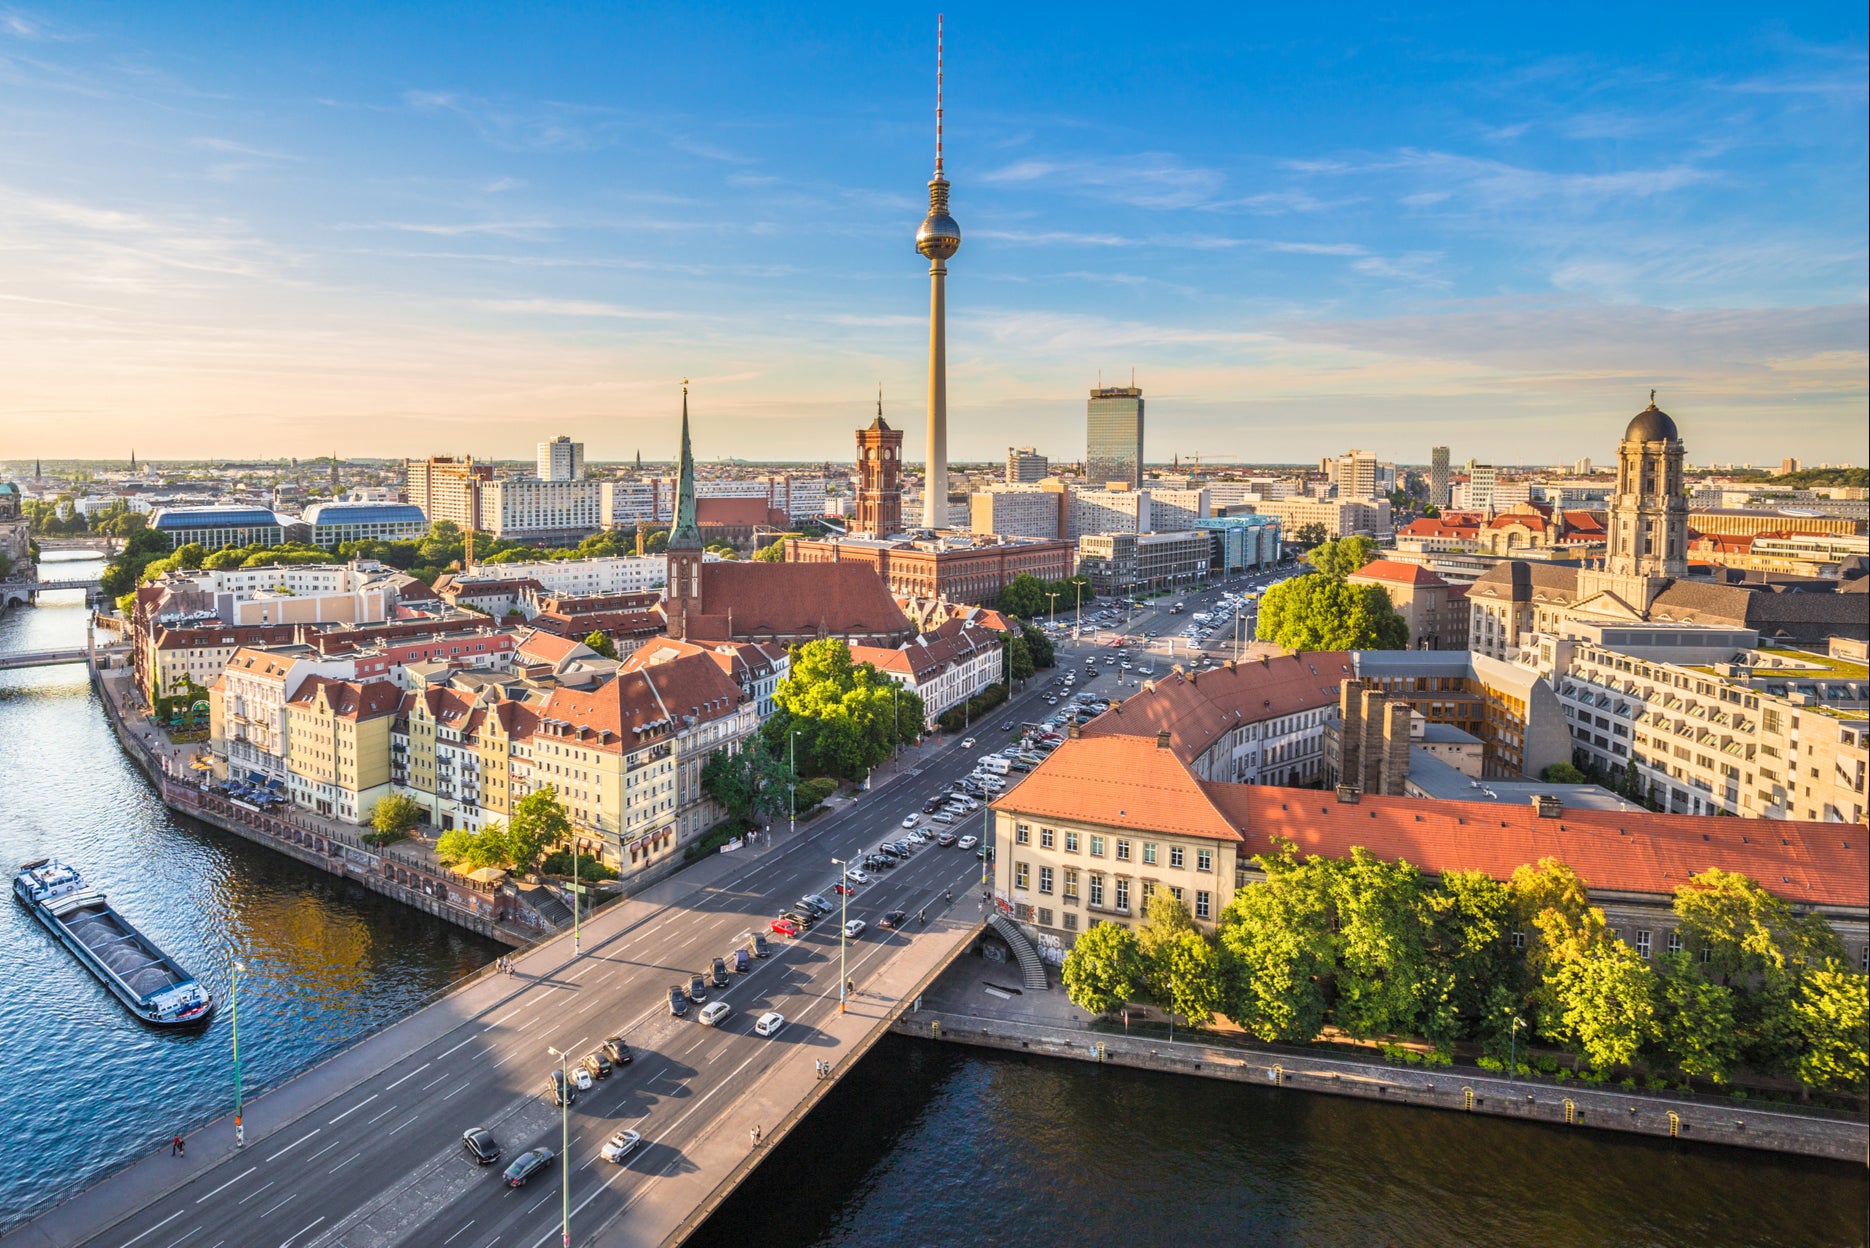 From the Reichstag to the Palace of Tears, Berlin is at its loveliest in early summer